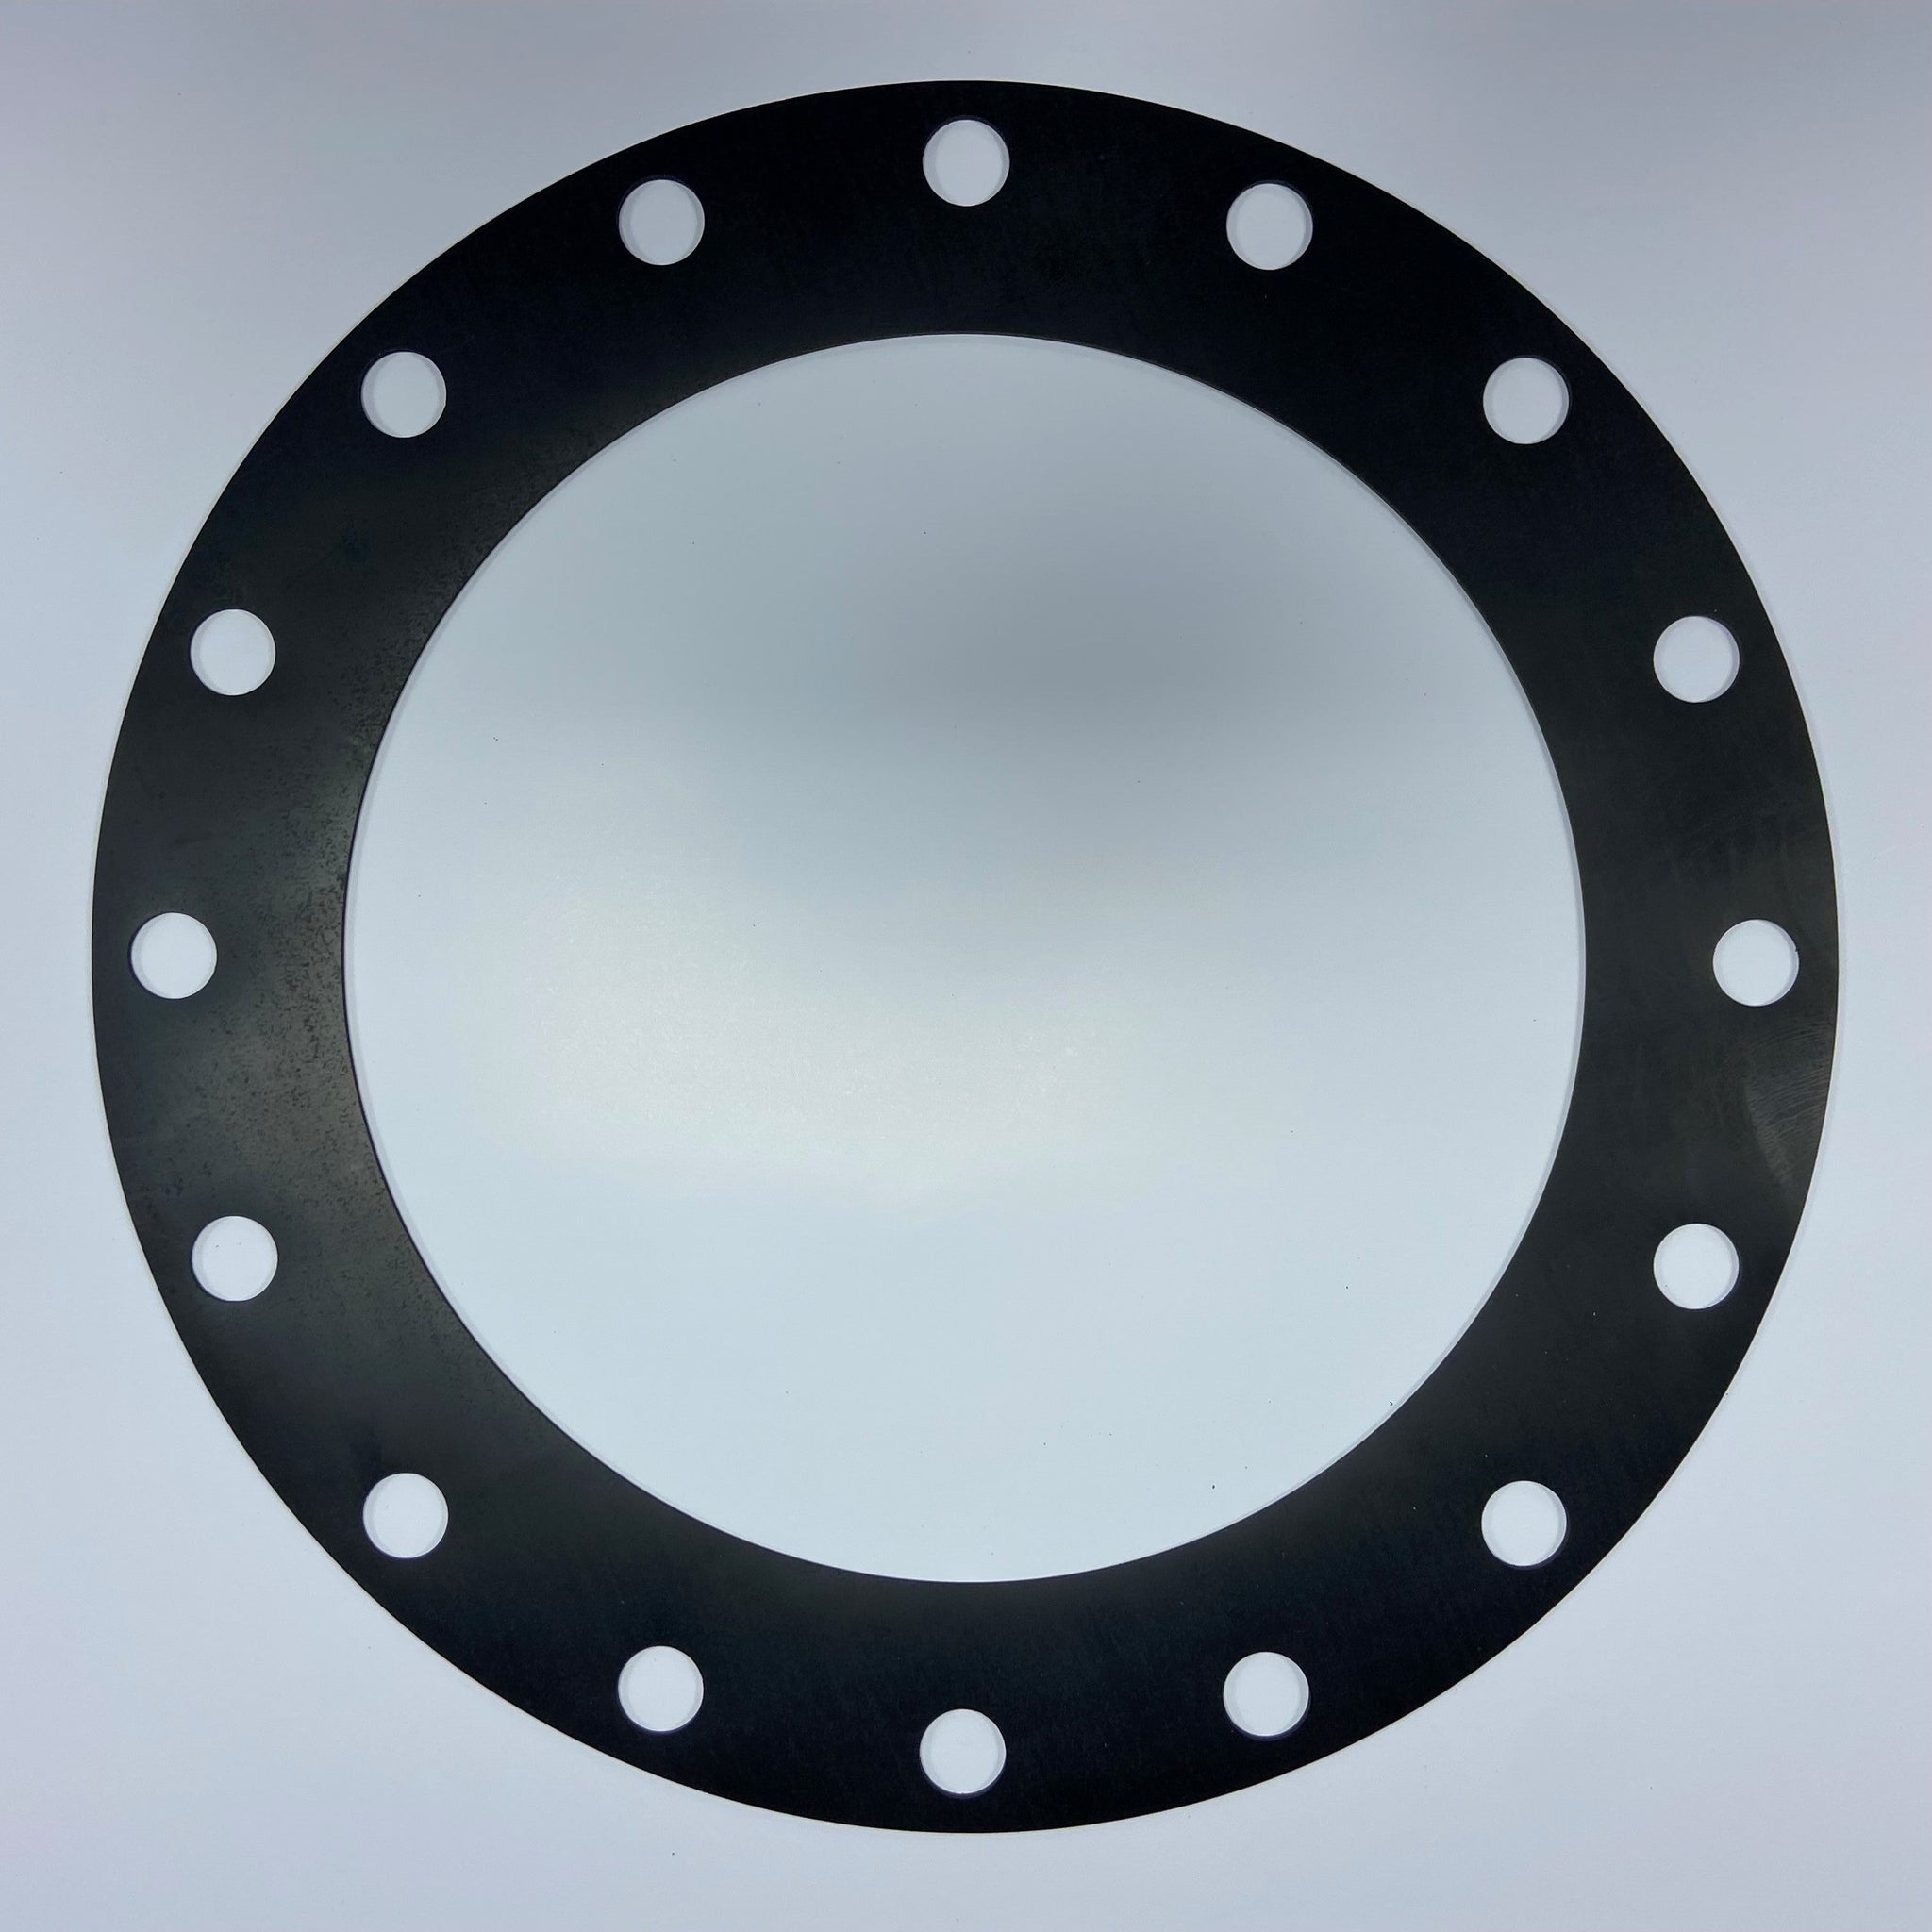 16 Full Face Flange Gasket (w/16 Bolt Holes) - 150 Lbs. - 1/8 Thick